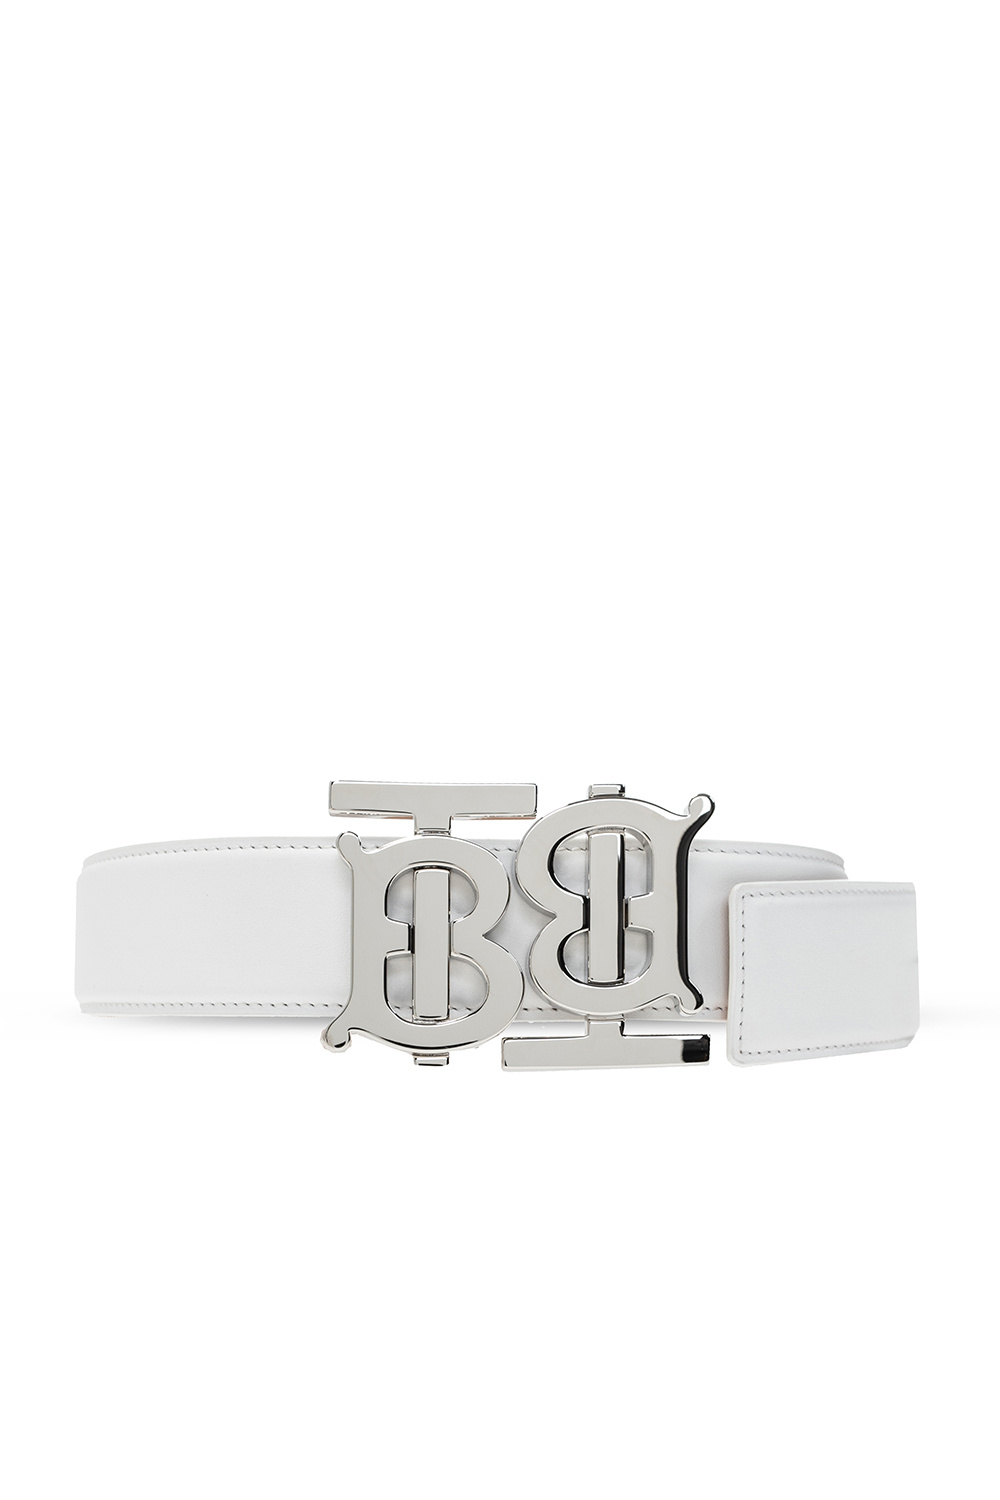 Burberry belts-B16522 - Click Image to Close